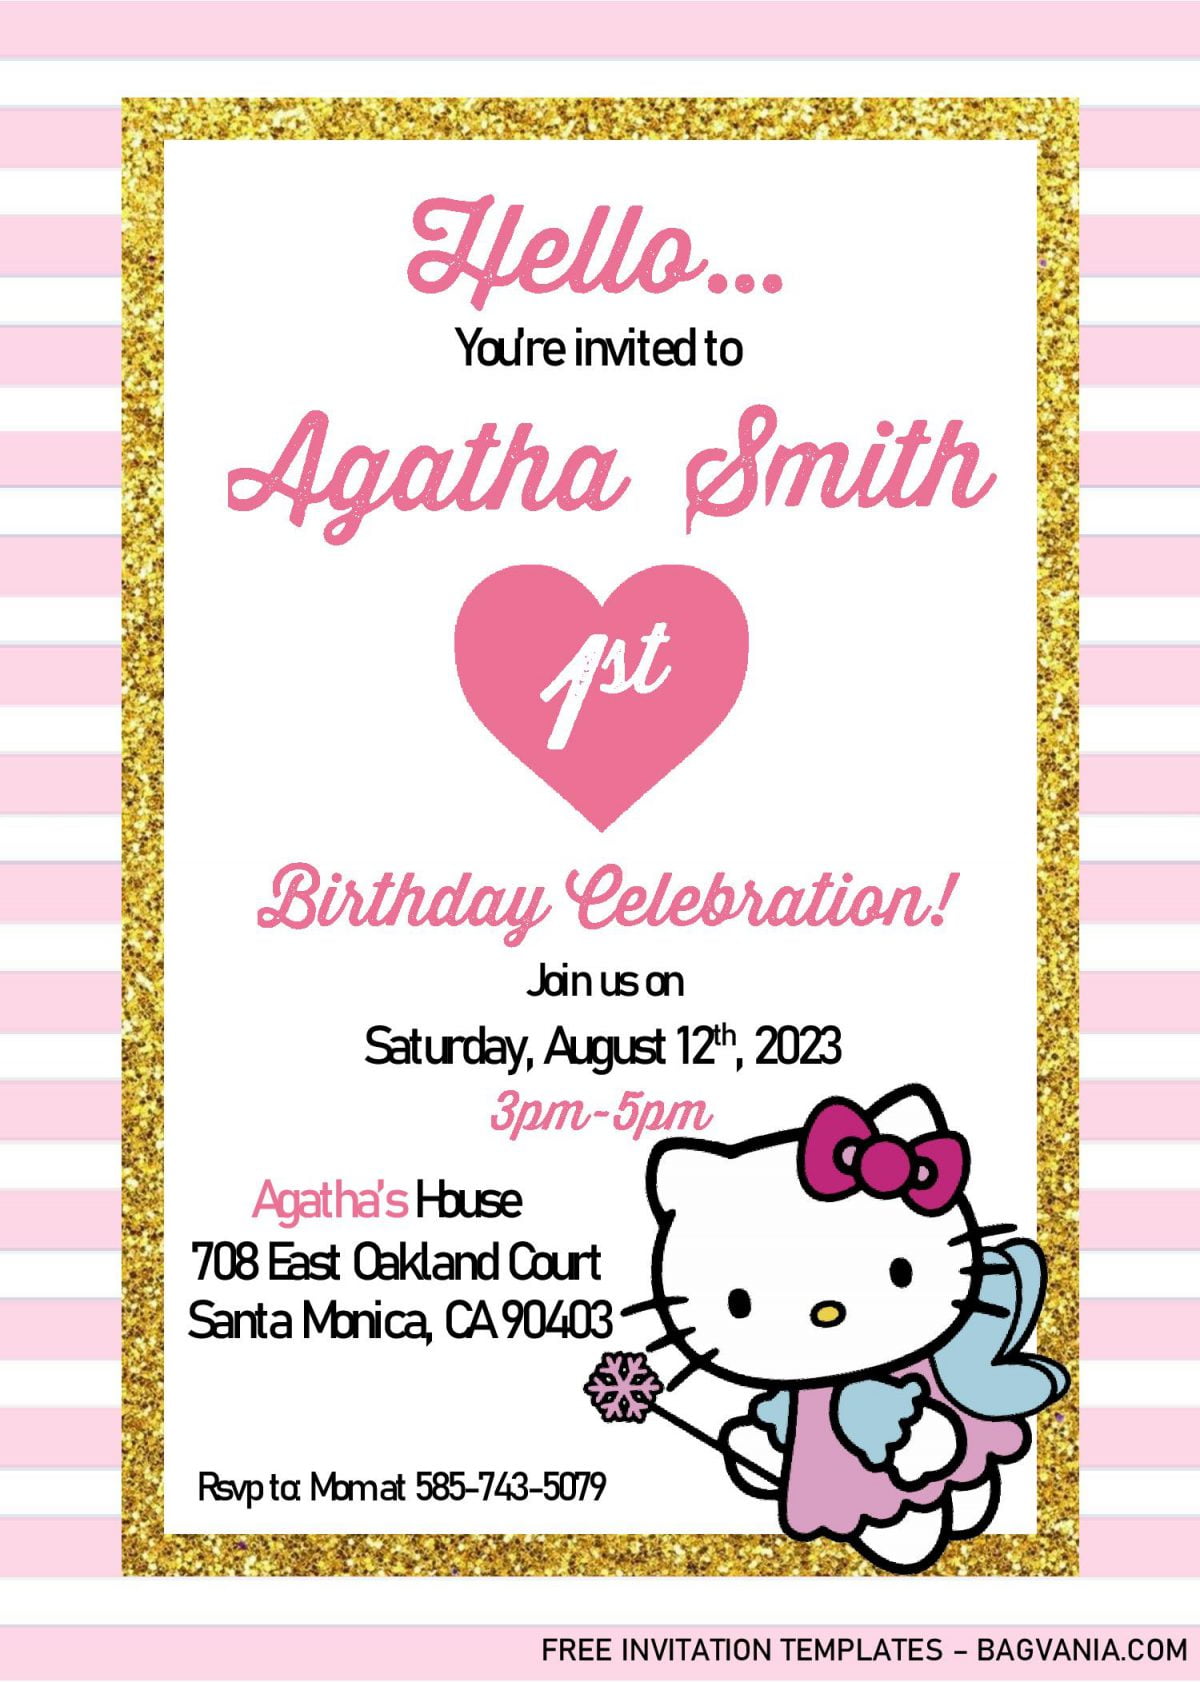 Hello Kitty Invitation Templates - Editable With MS Word and has pink stripes